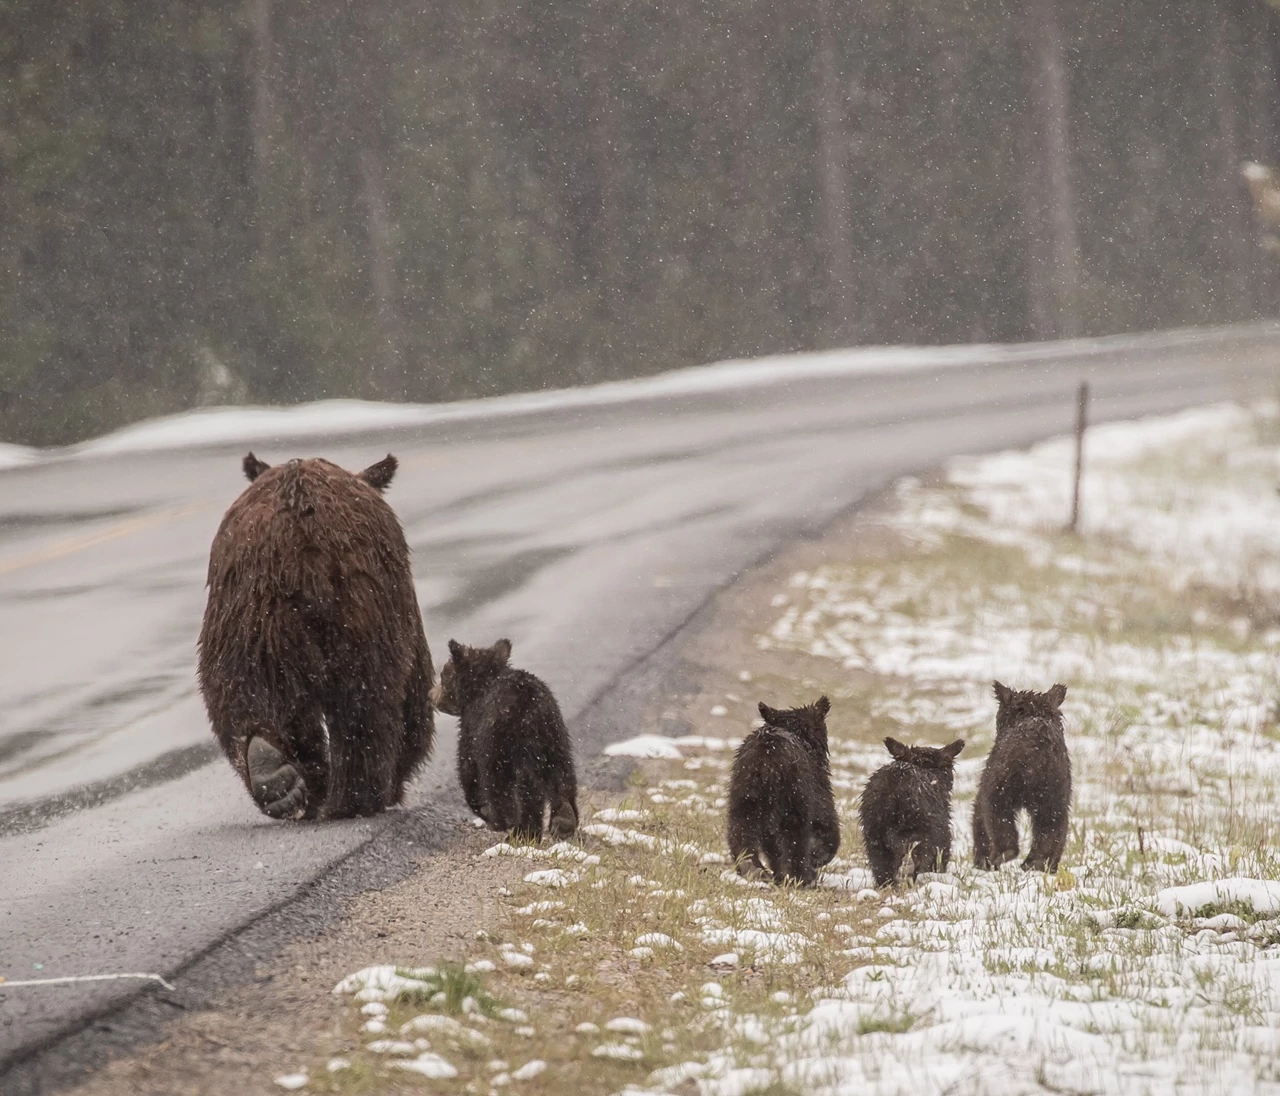 Grizzly 399 and cubs